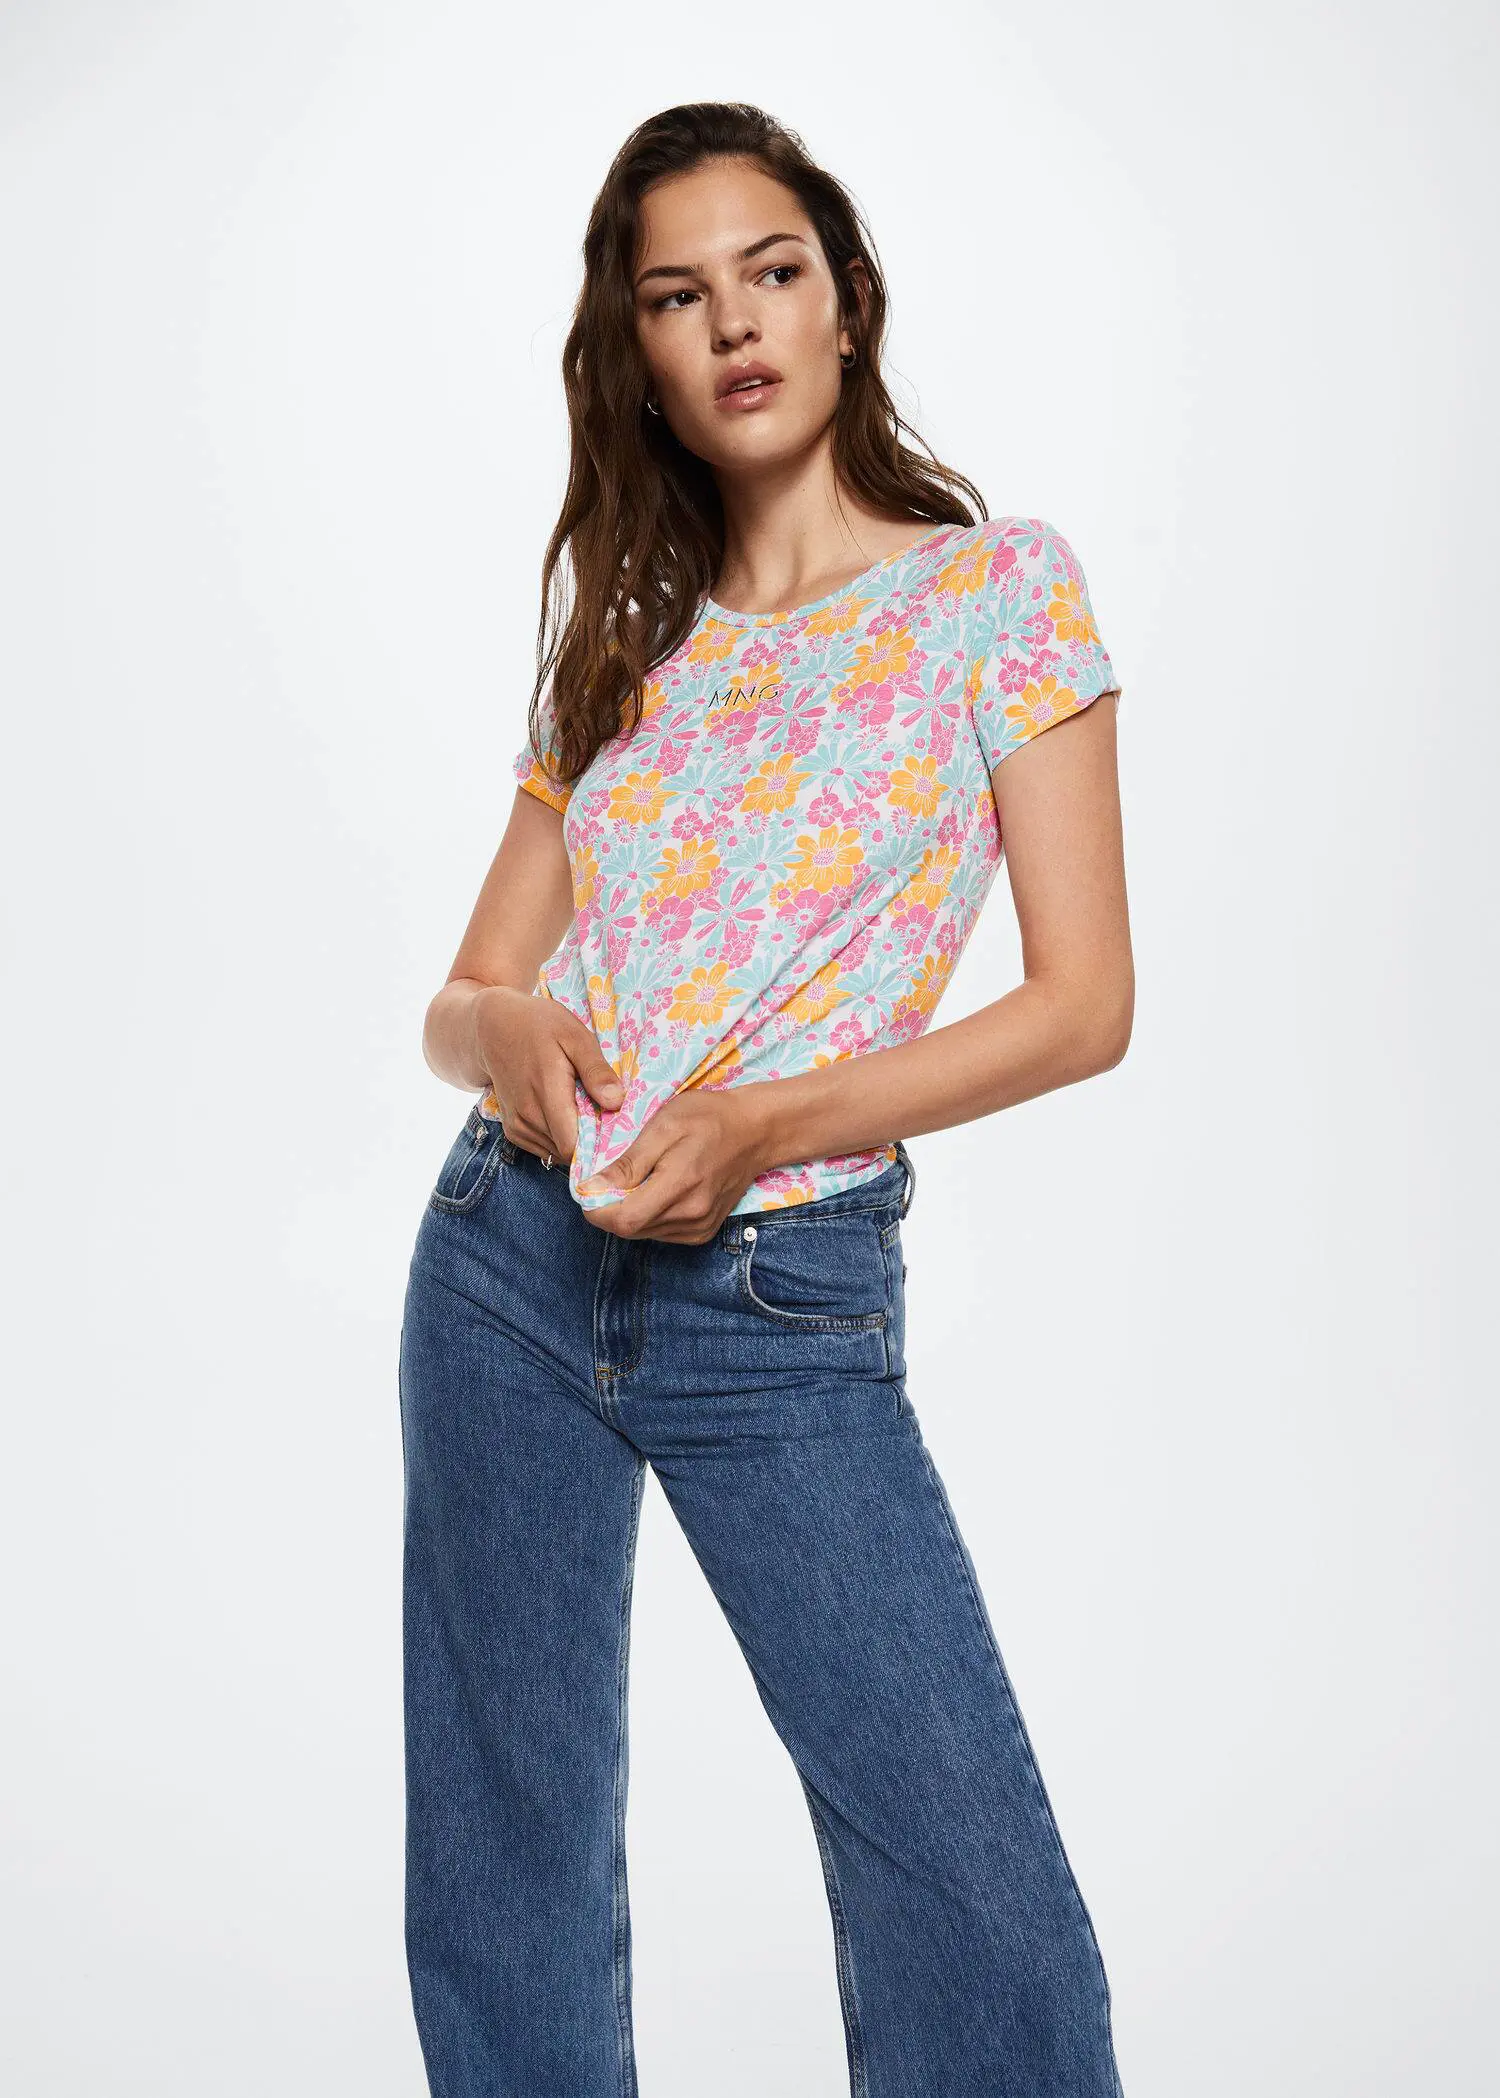 Mango Printed cotton-blend T-shirt. a woman in a floral shirt and jeans holding a toothbrush. 